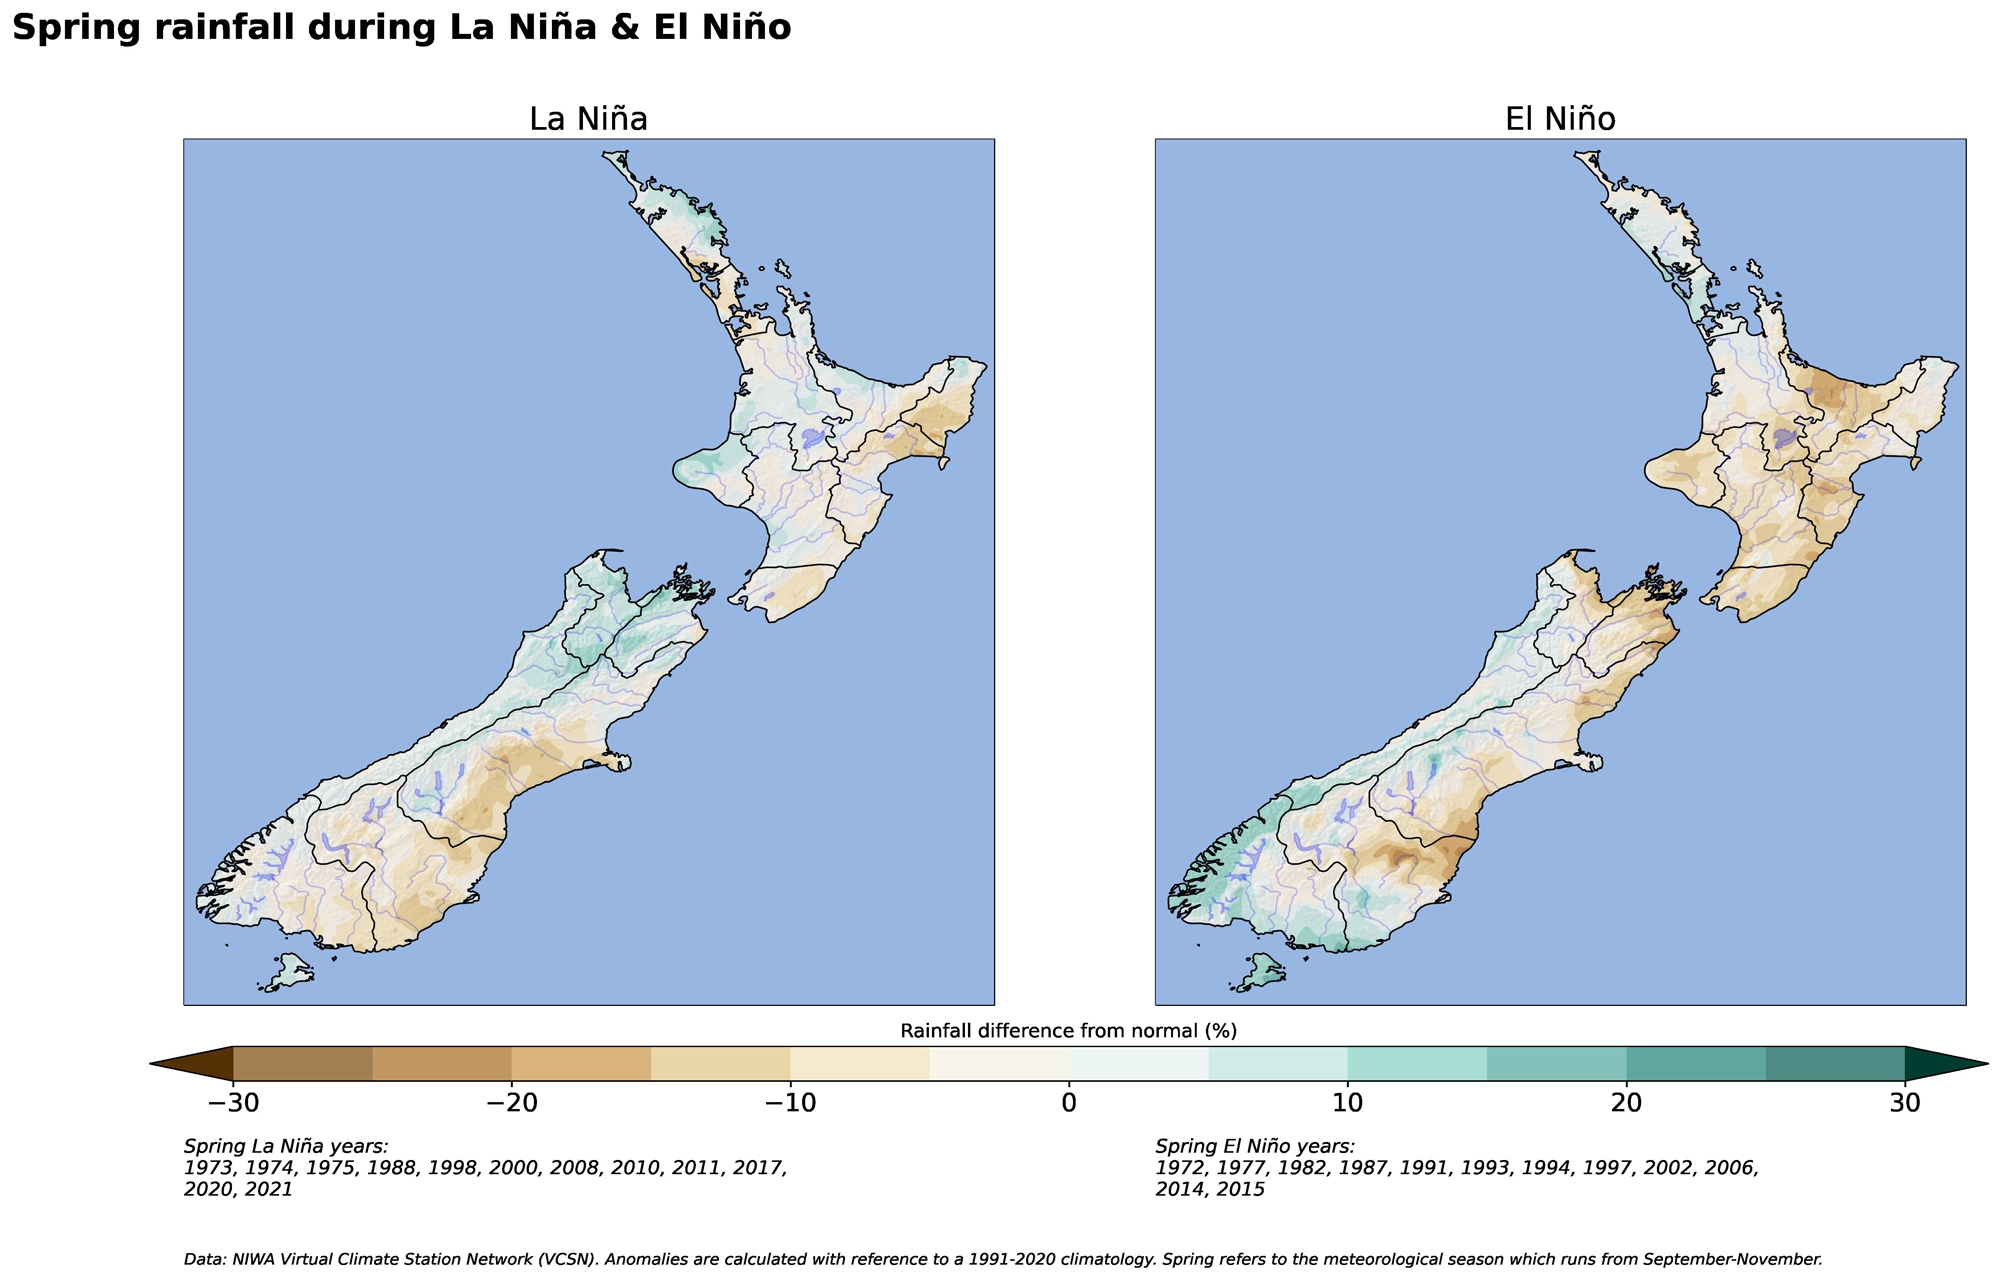 New Zealand maps of percentage difference of spring rainfall from normal during La Niña and El Niño from the year 1973 to 2022.